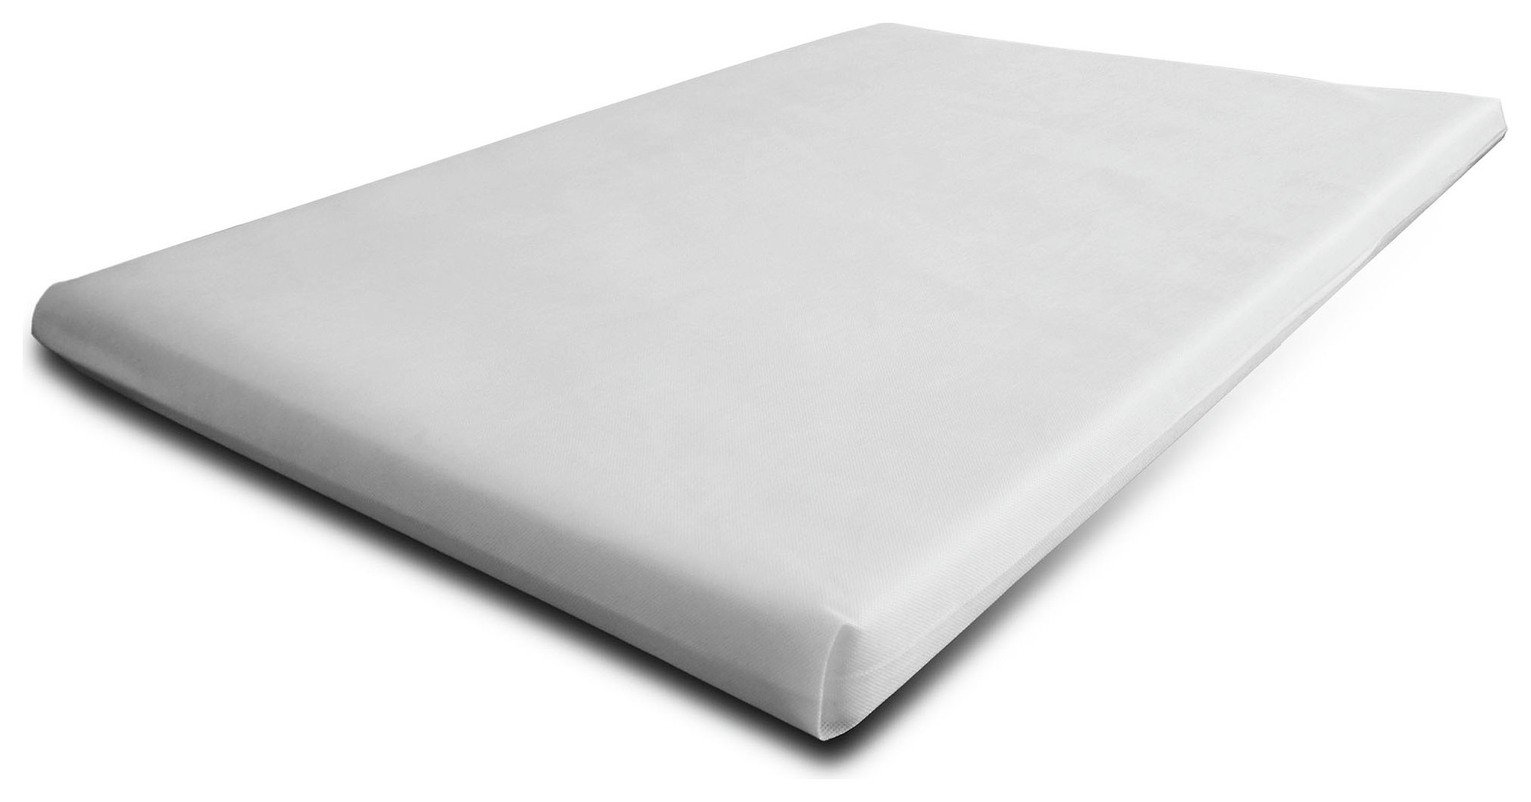 mattress for cuggl travel cot